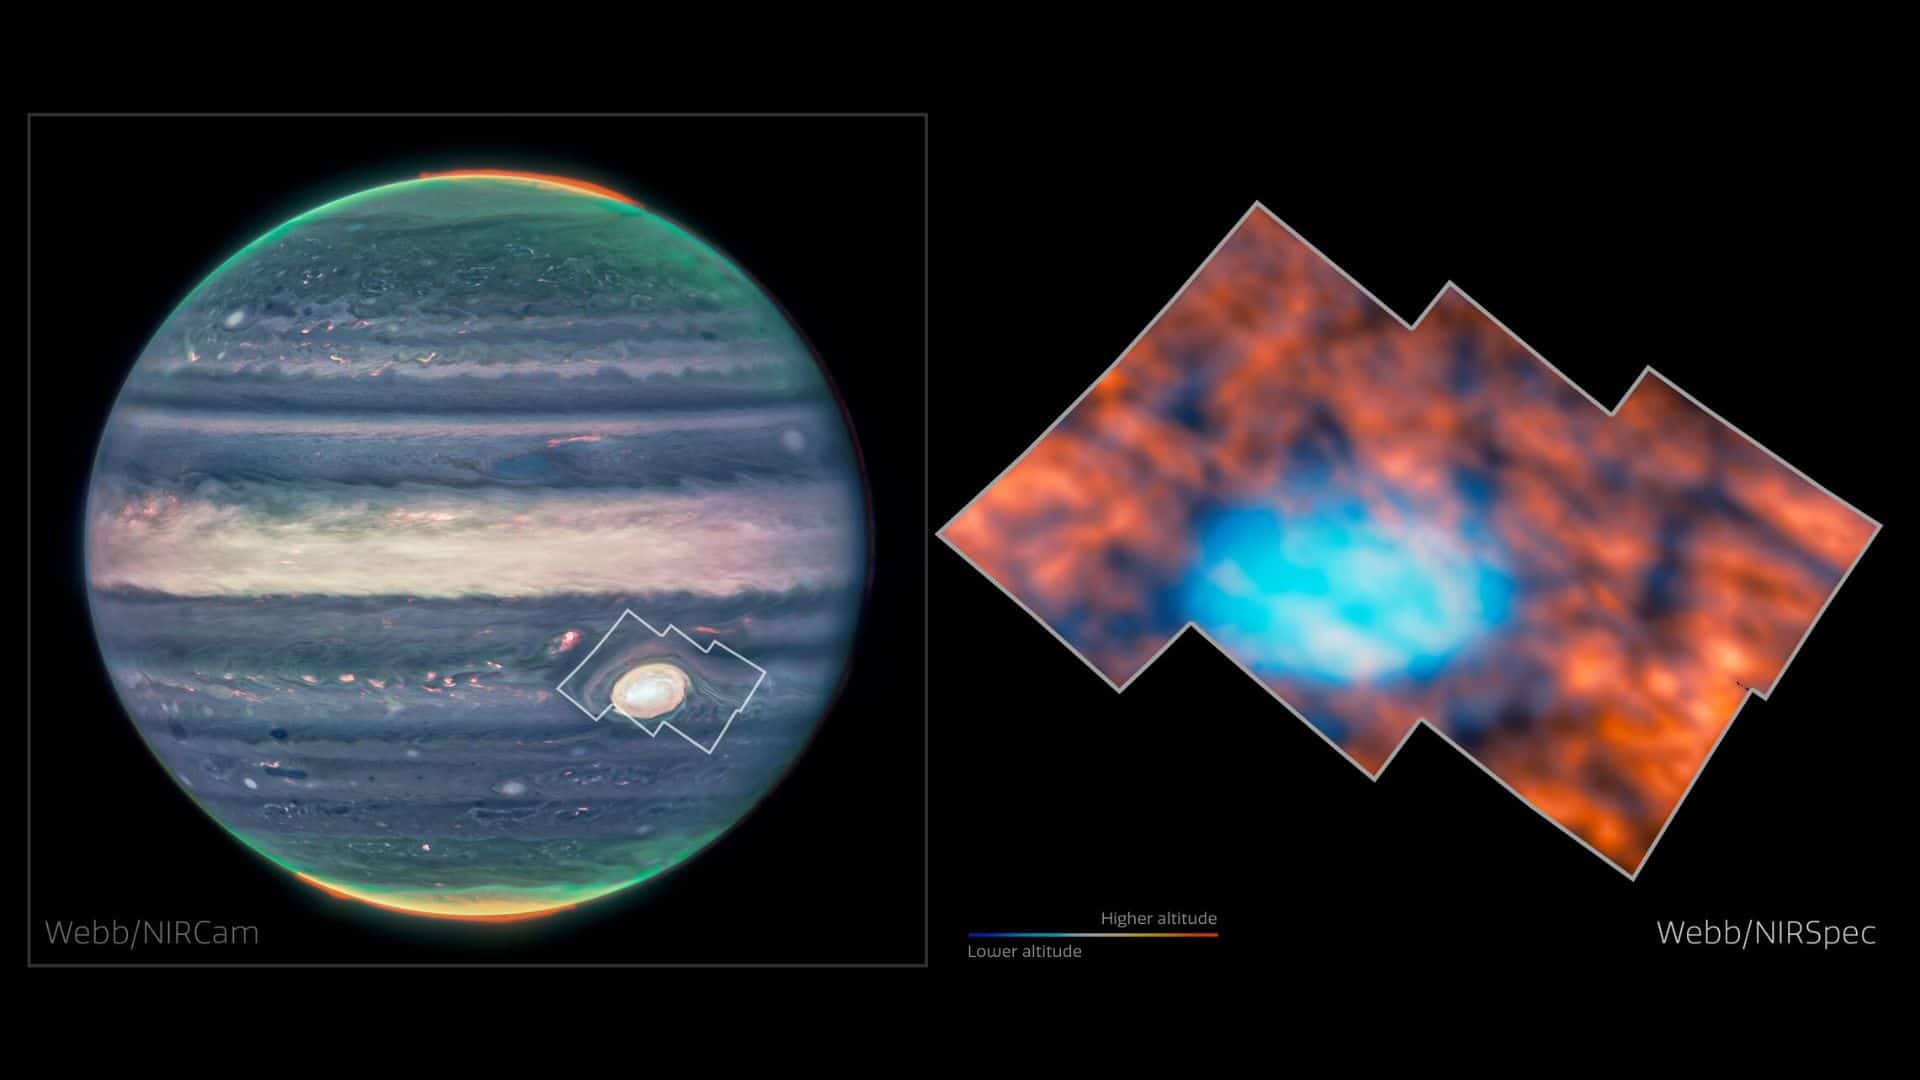 The James Webb Space Telescope captured Jupiter’s atmosphere around the Great Red Spot